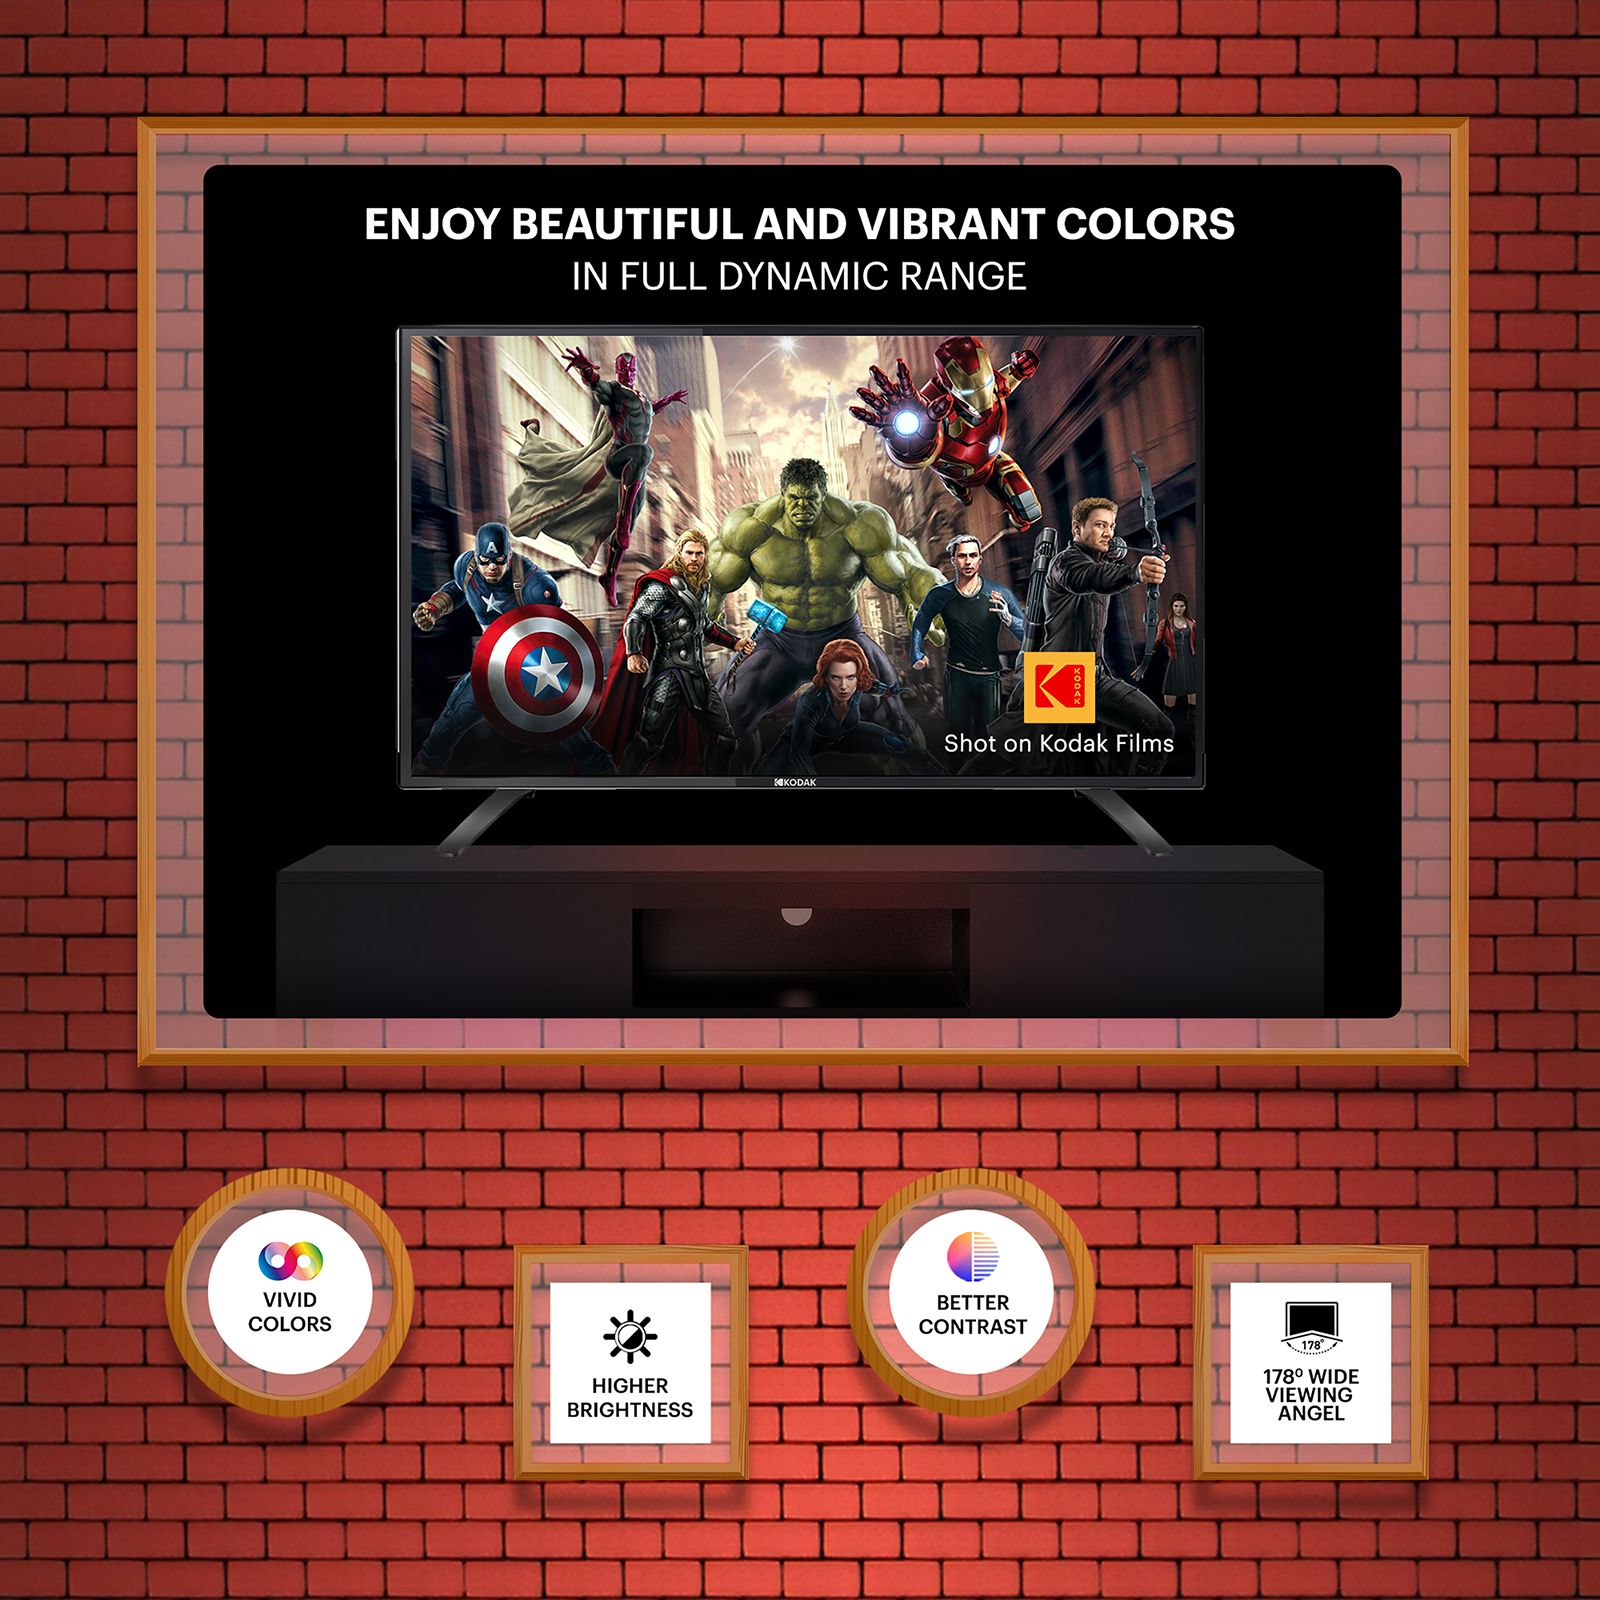 Buy Kodak 9xpro 106 Cm 42 Inch Full Hd Led Smart Android Tv With Dolby Audio Online Croma 1490